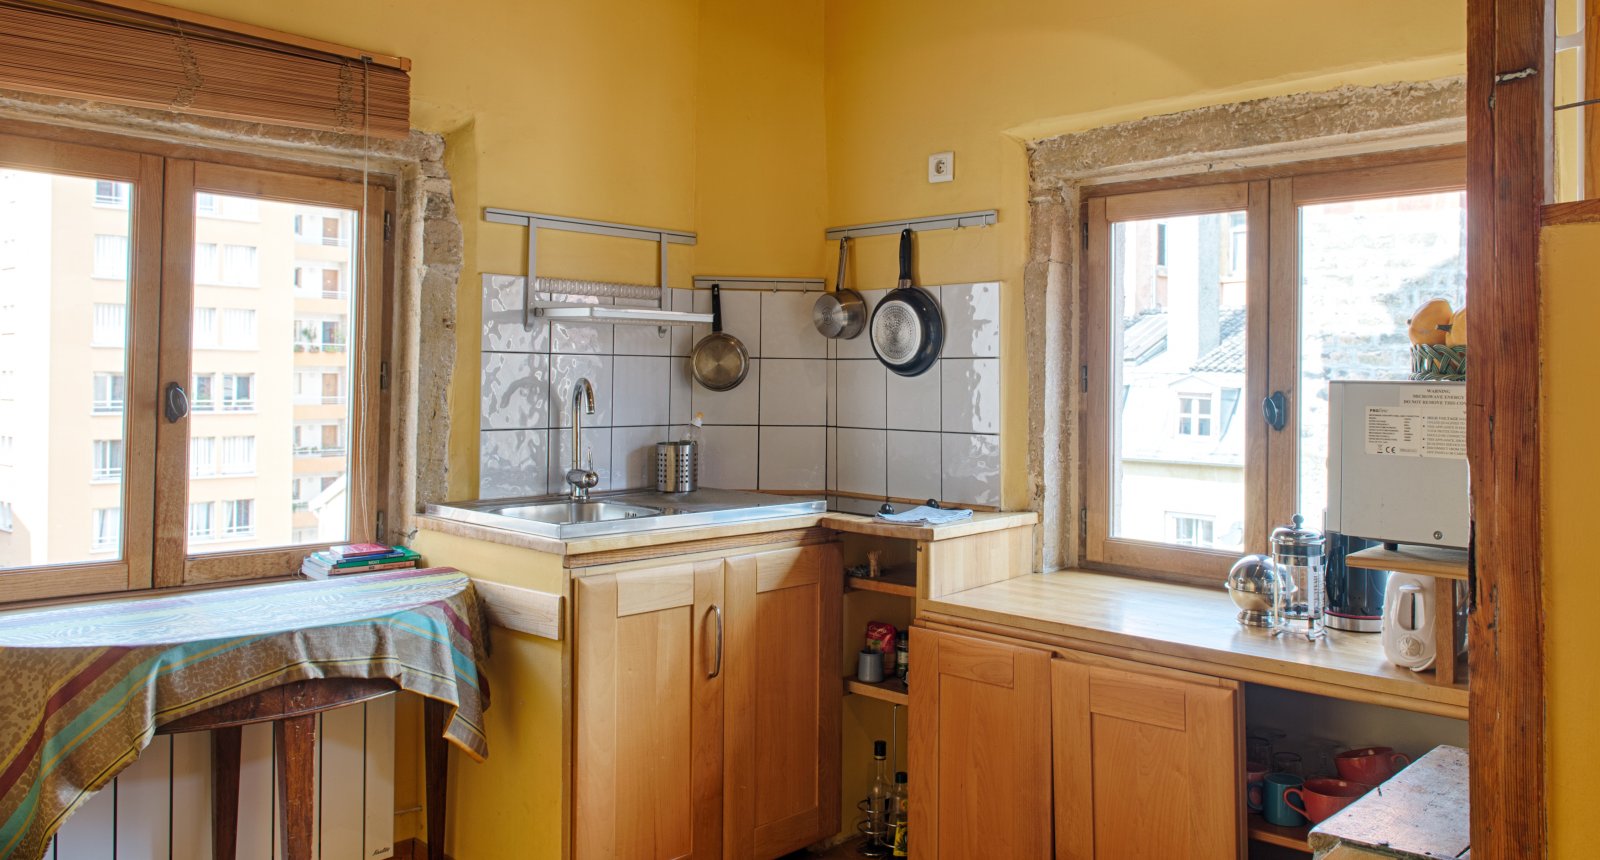 kitchen of the self-catering apartment